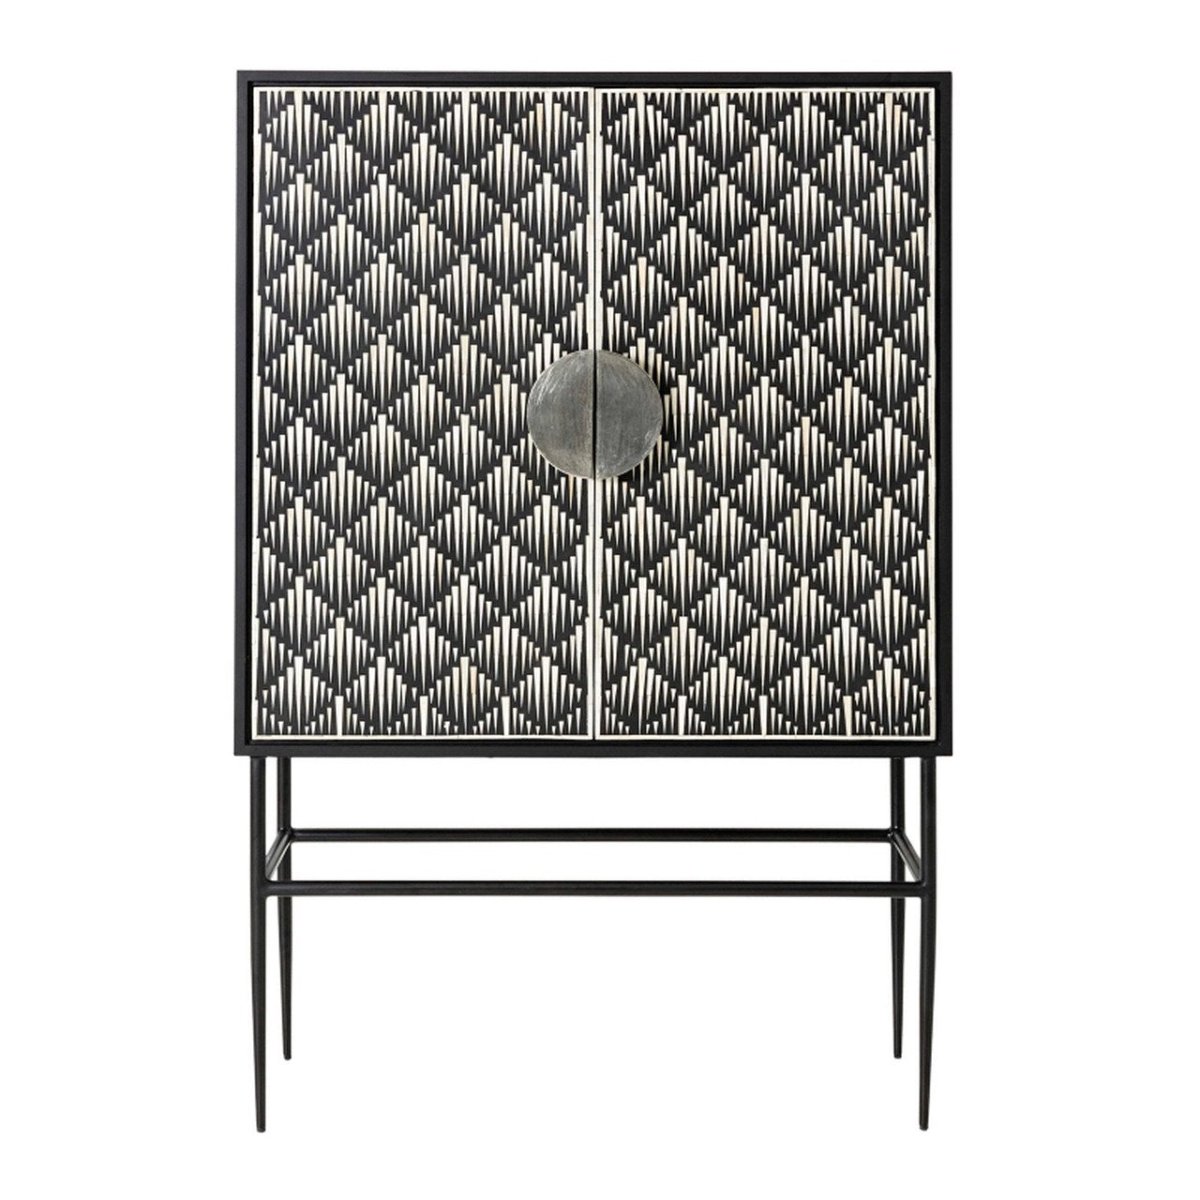 Bone Inlay Bar Cabinet in Black & White Color | Handmade Cabinetry Furniture Cabinet - Bone Inlay Furnitures